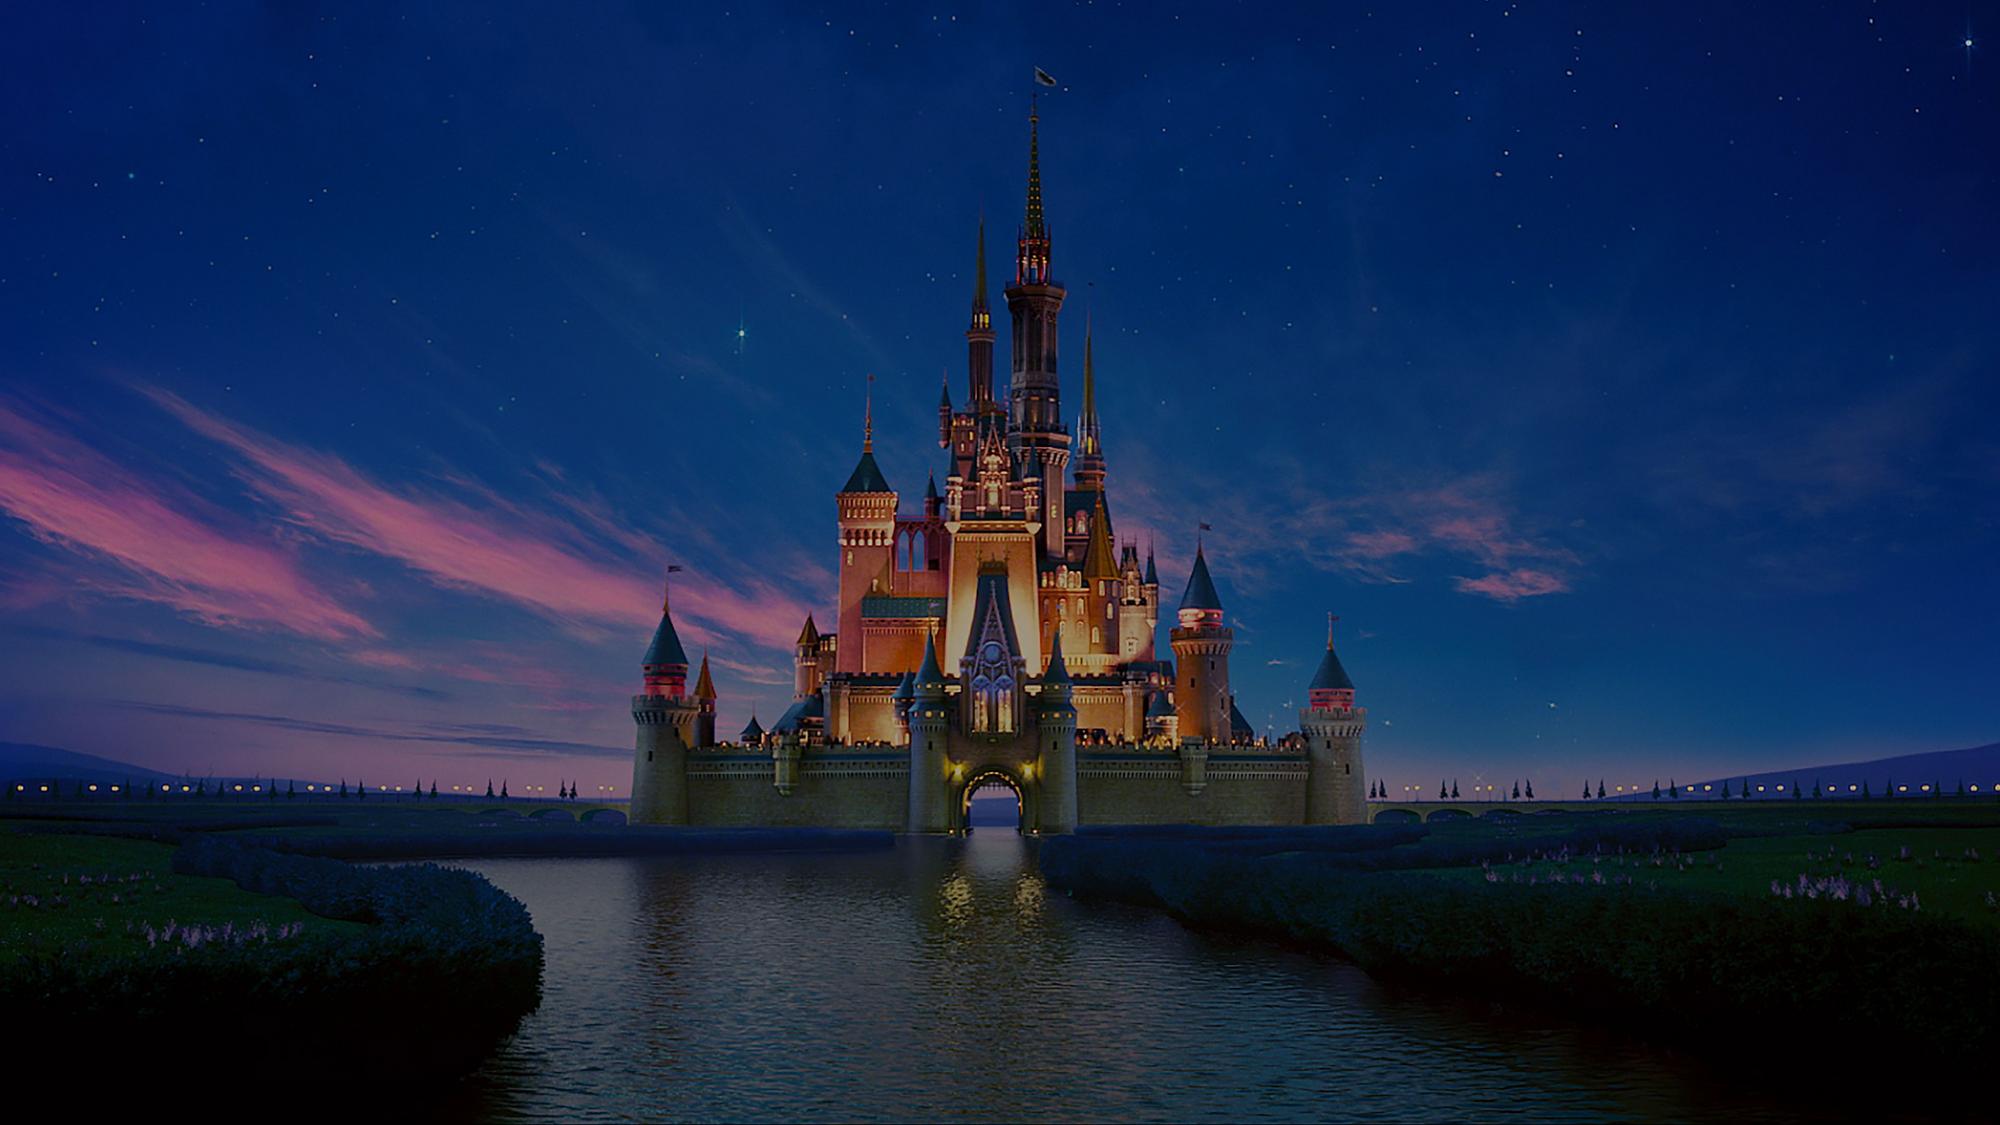 Disney Drops 'Fox' From 20th Century And Searchlight